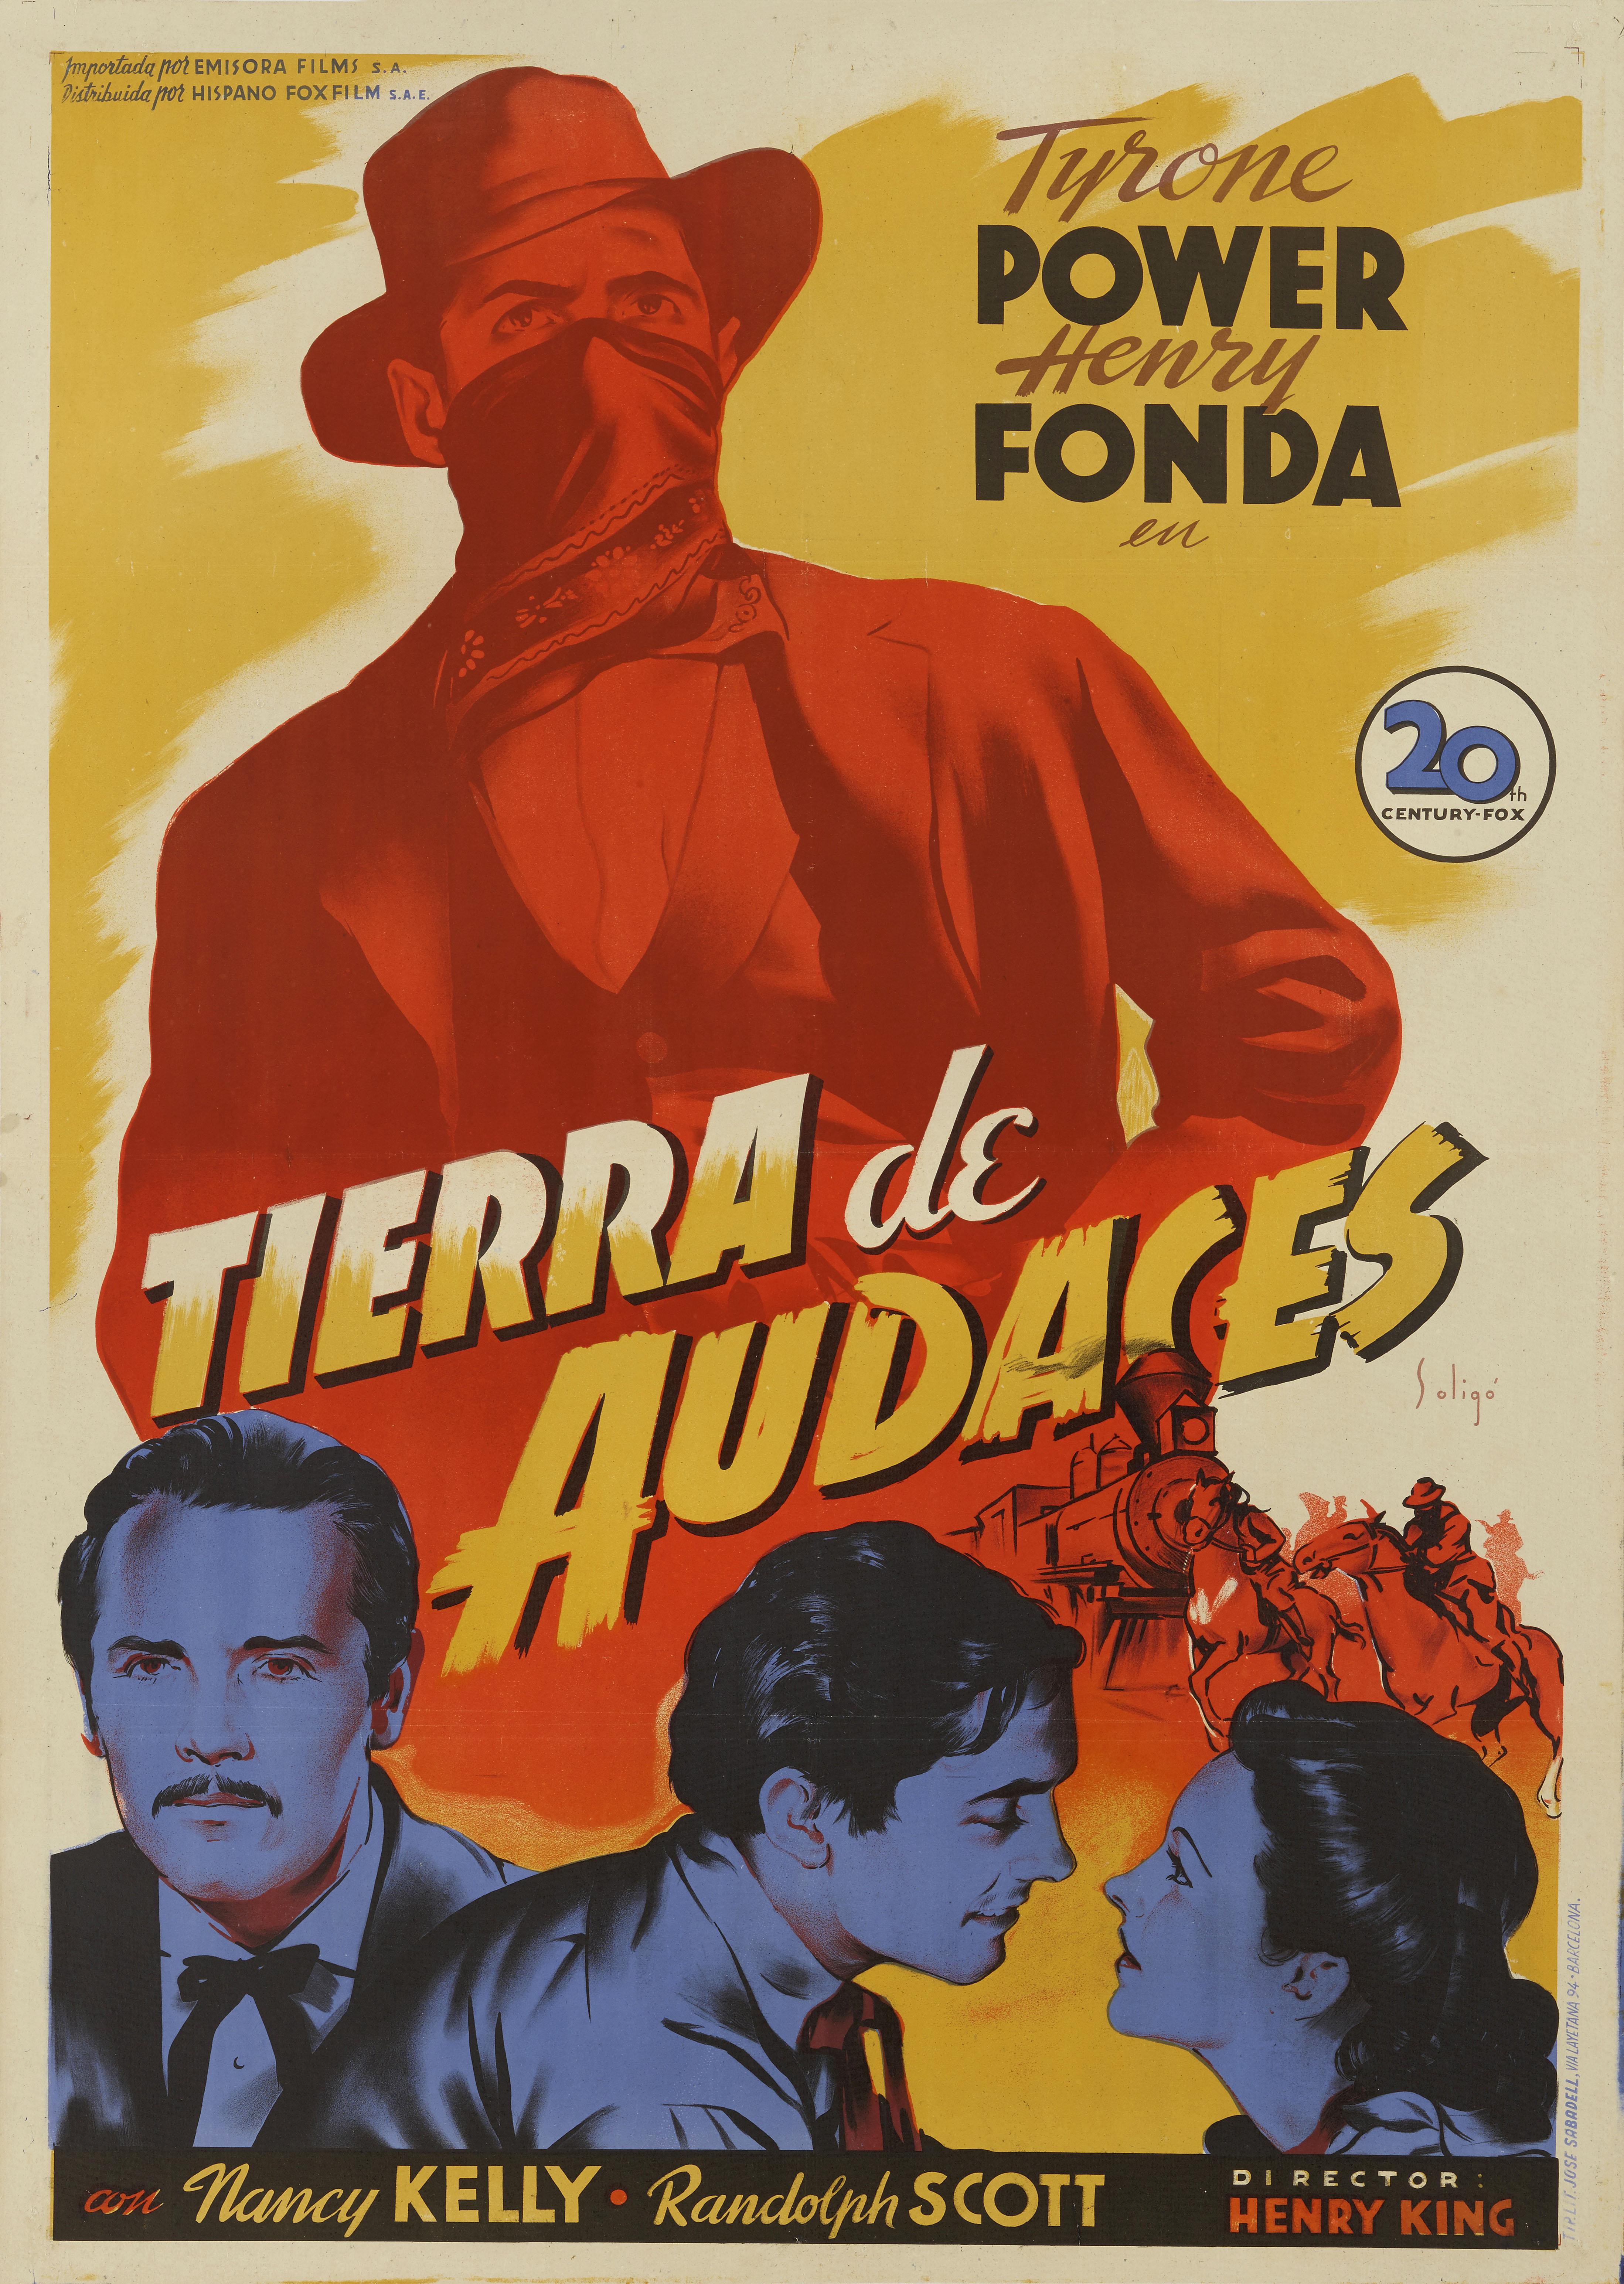 Original Spanish film poster for the 1939 Western. This film was directed by Henry King, and stars Tyrone Power, Henry Fonda, Nancy Kelly and Randolph Scott. The film is broadly based on the life of the notorious outlaw Jesse James. The James family